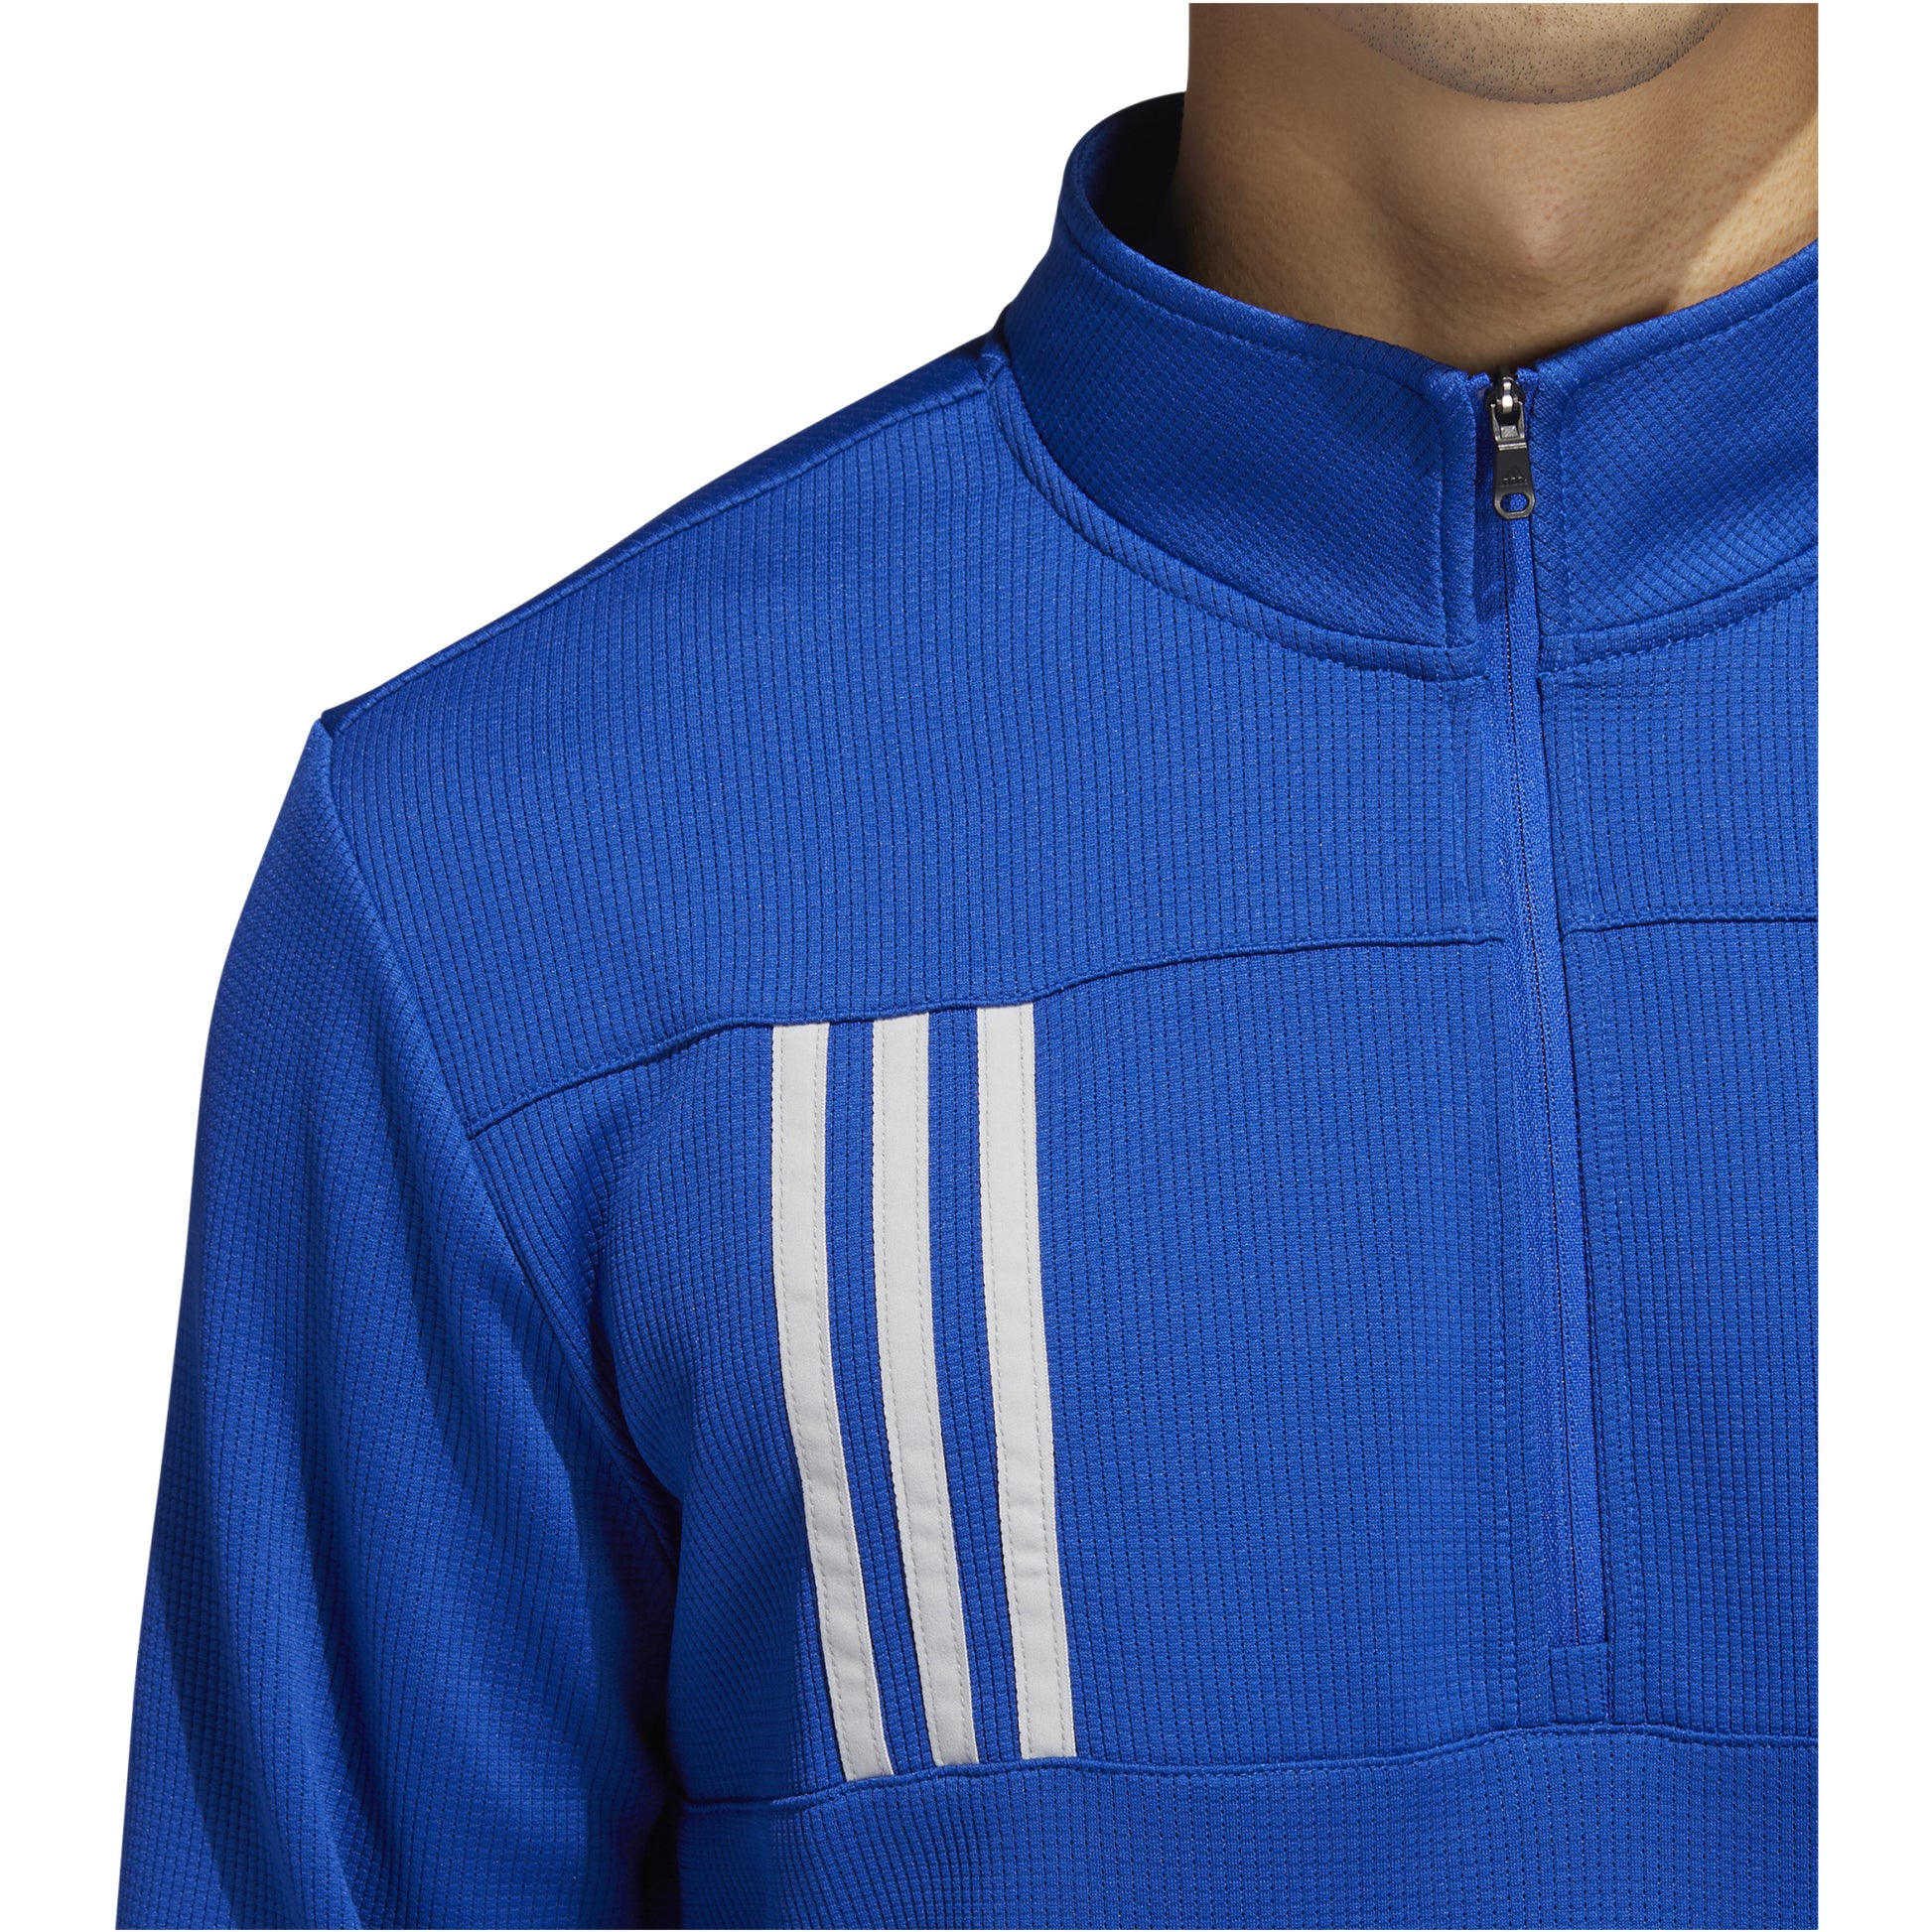 3-Stripes Textured 1/4 Zip Pullover – Golf Team Products